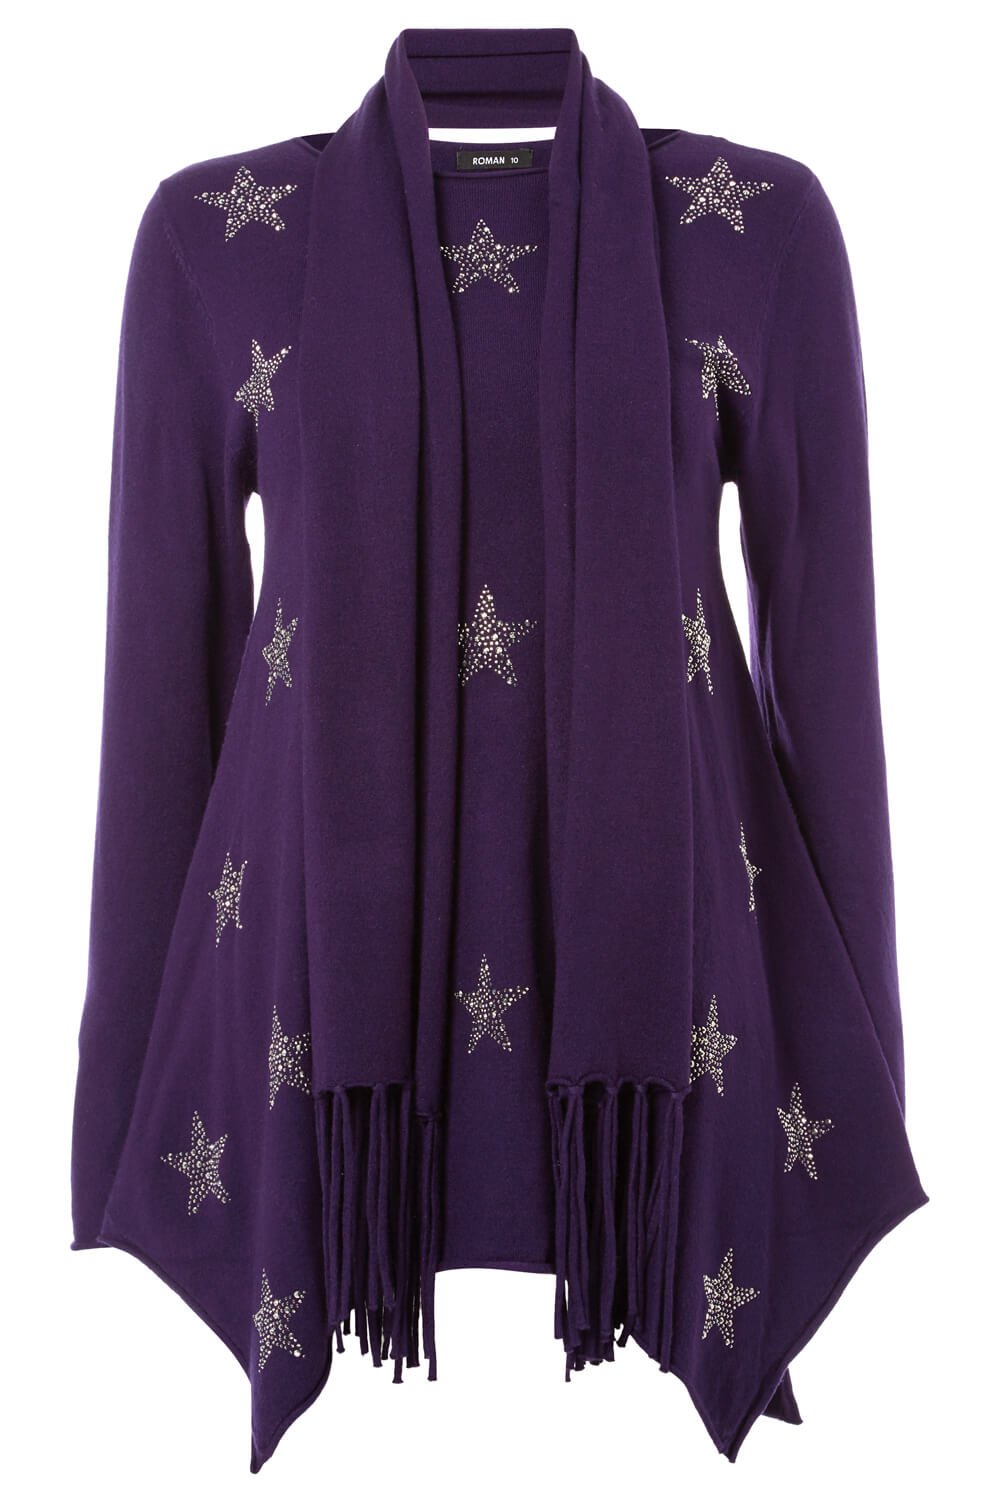 Purple Star Print Knitted Tunic with Scarf, Image 5 of 5